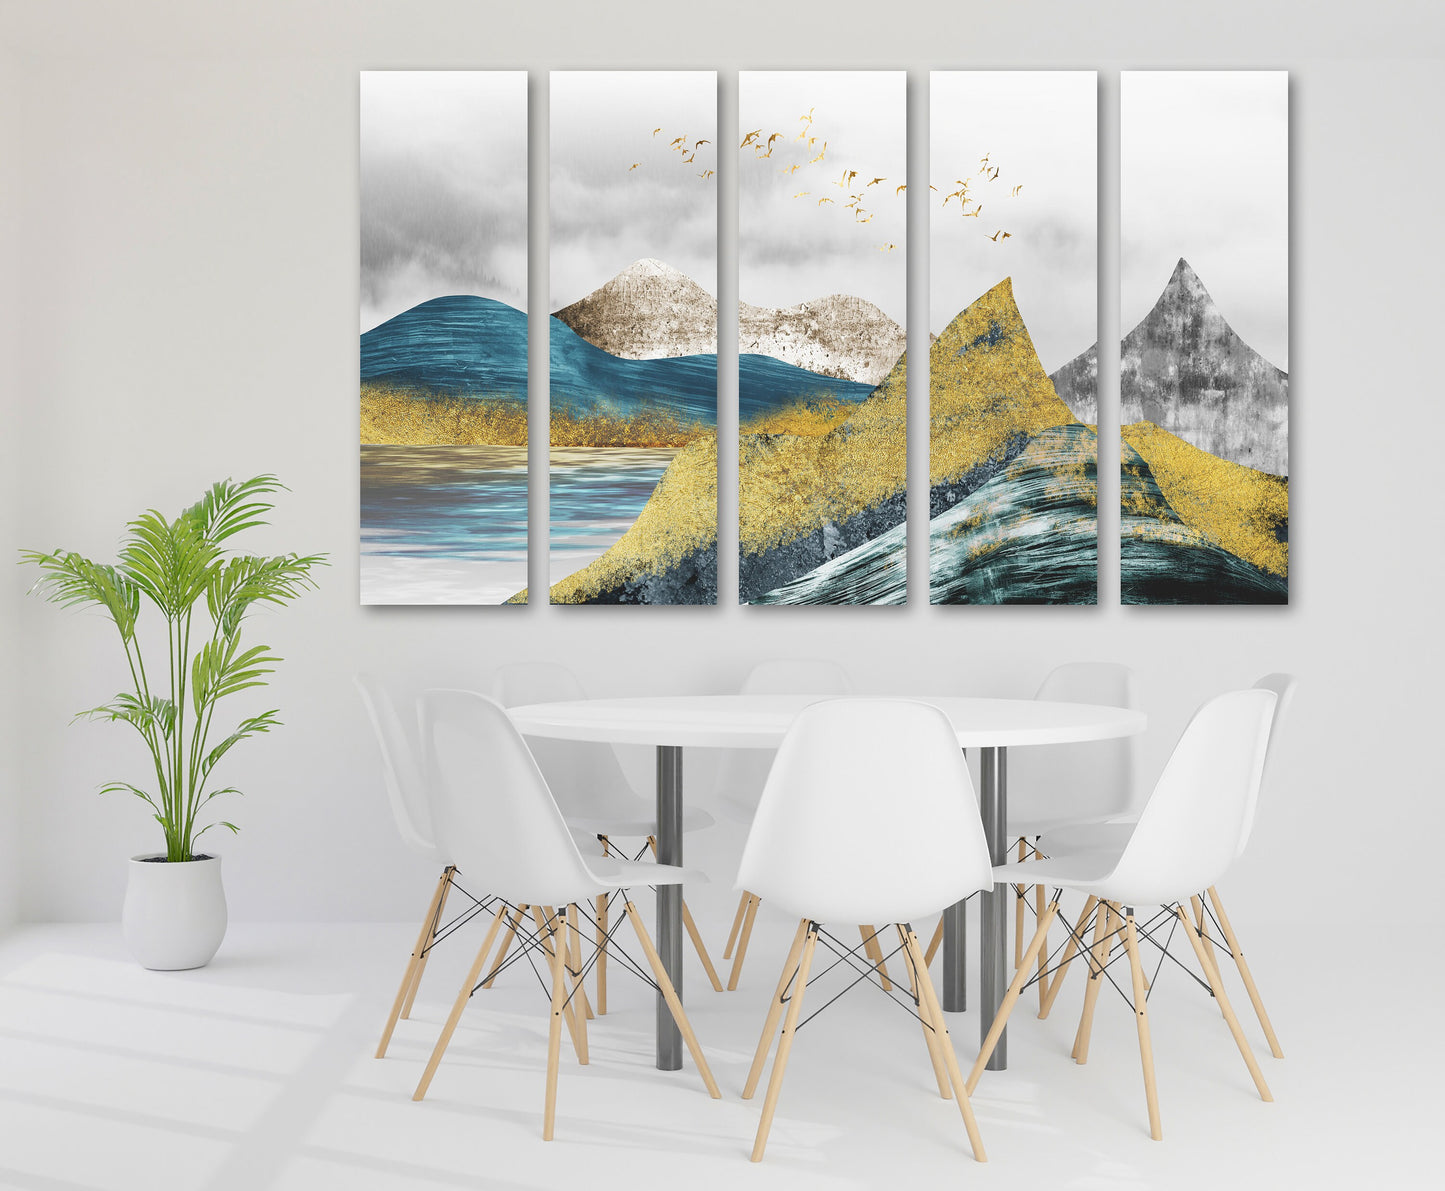 Blue ridge mountains abstract nature wall art canvas paintings japanese art canvas mountains wall art Smoky mountains gift